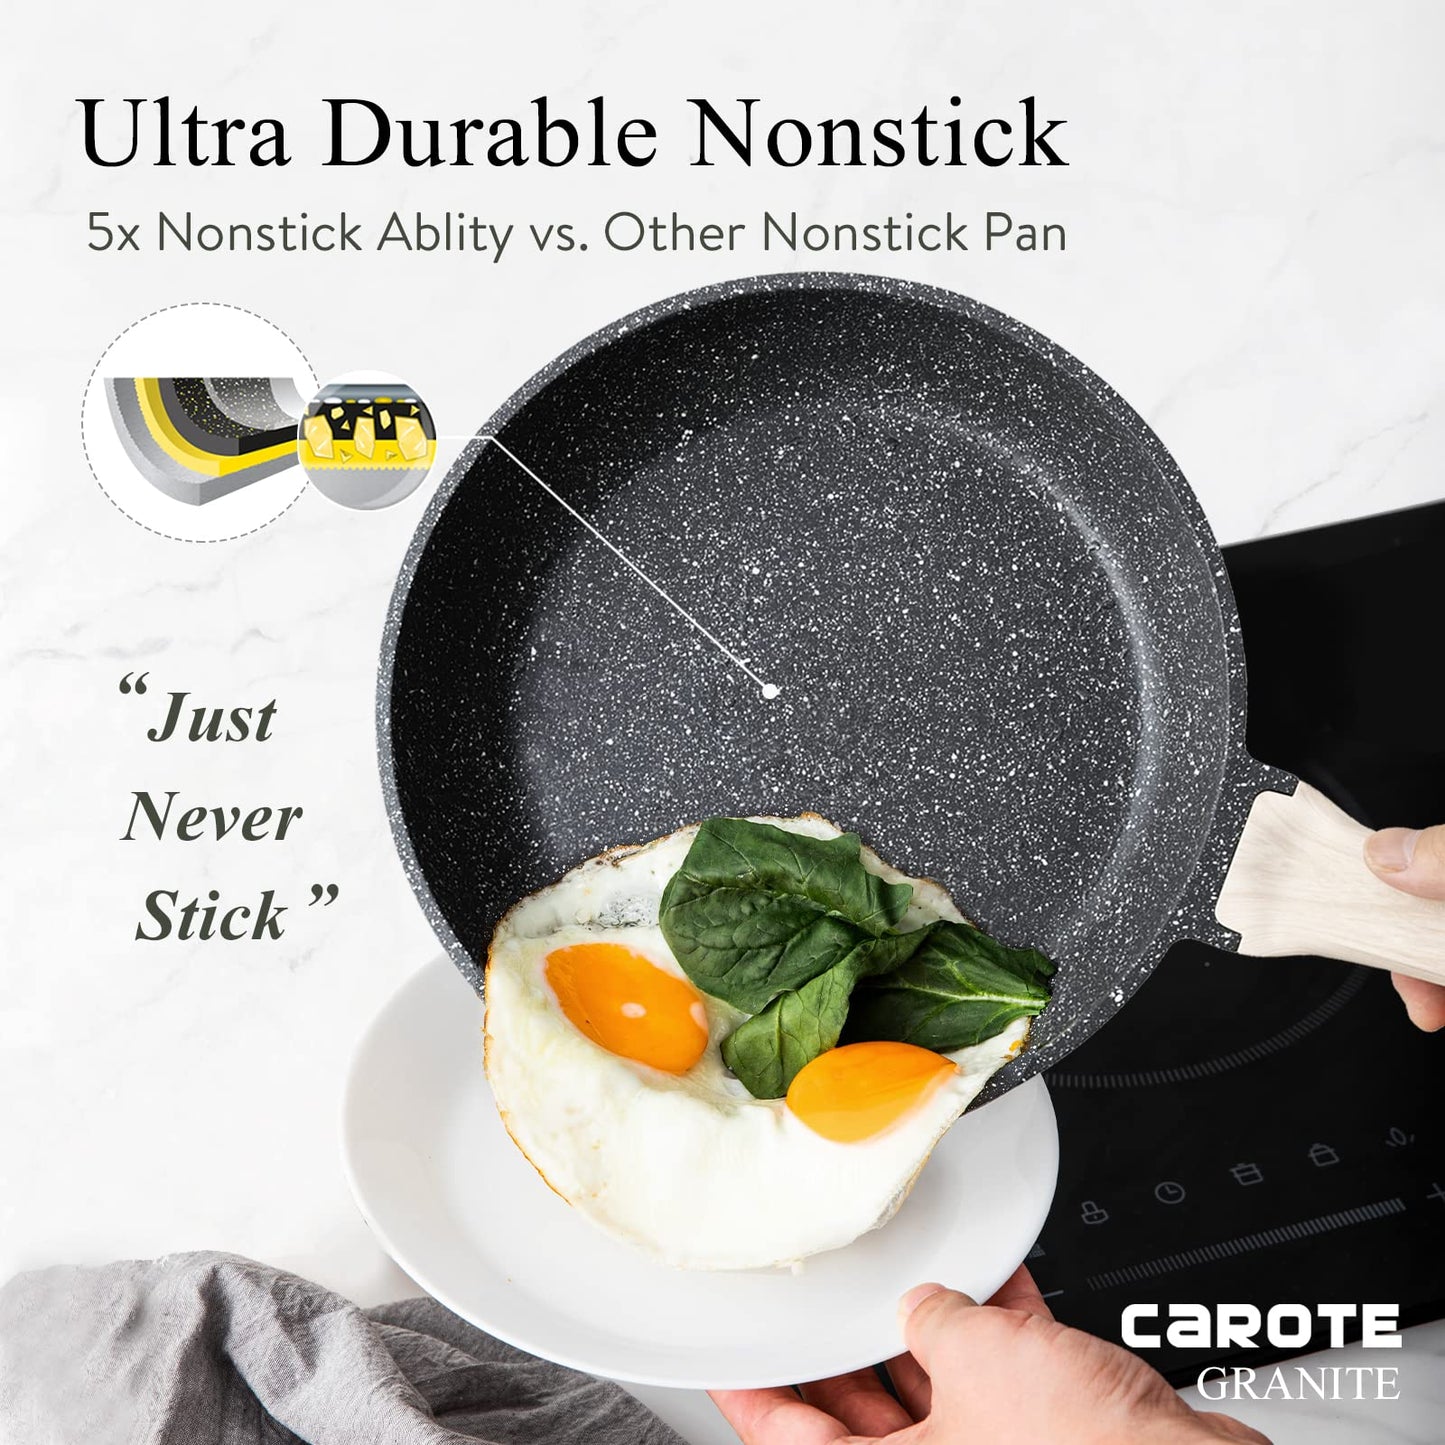 CAROTE Nonstick Frying Pan Skillet,8" Non Stick Granite Fry Pan with Glass Lid, Egg Pan Omelet Pans, Stone Cookware Chef's Pan, PFOA Free (Classic Granite, 8-Inch)